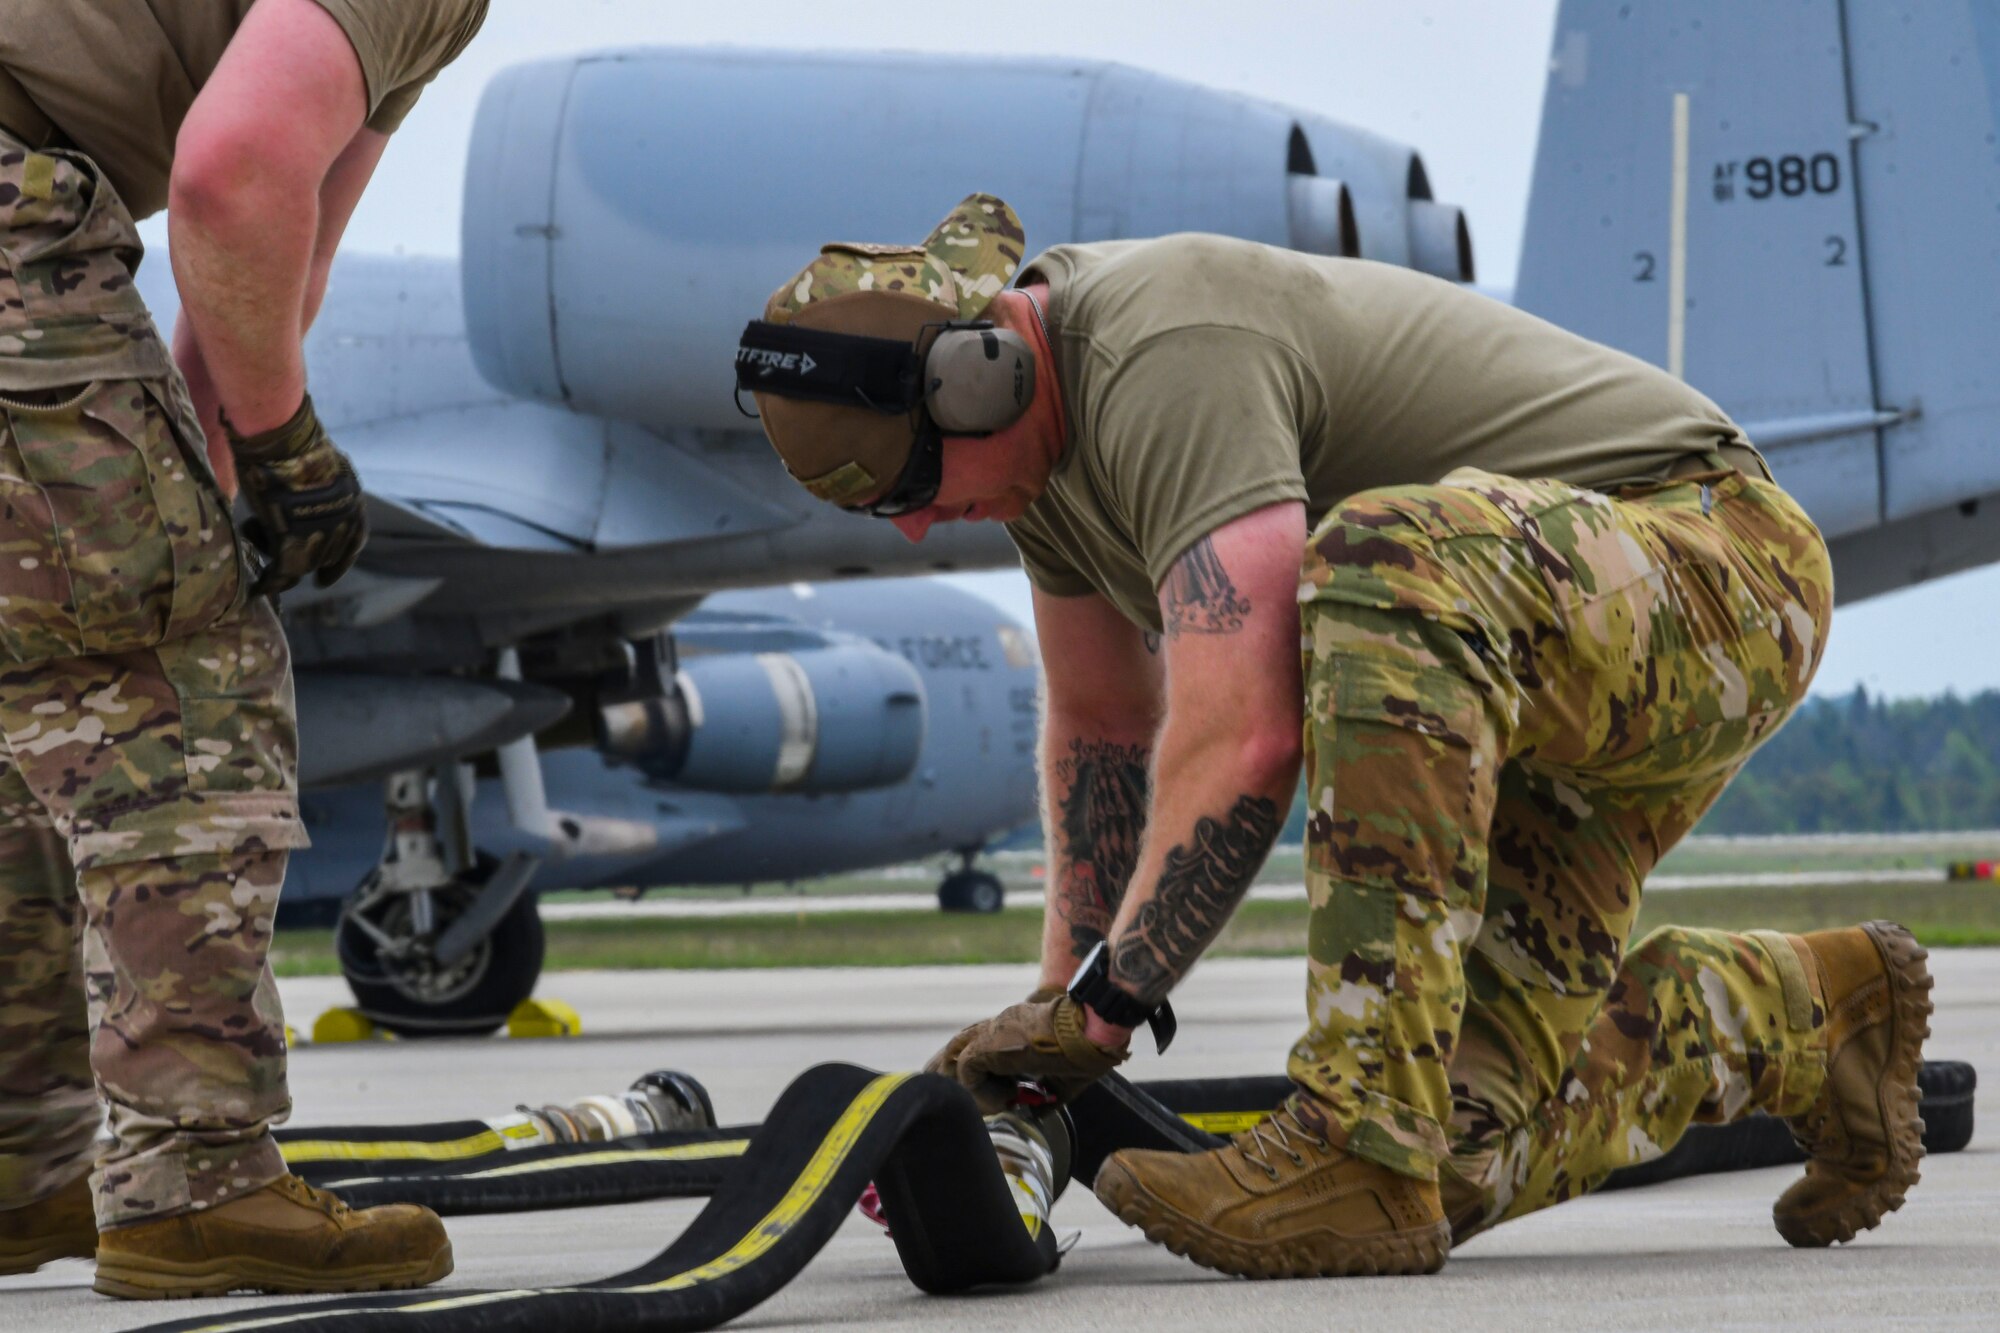 A photo of an airman prepping a hose for fueling